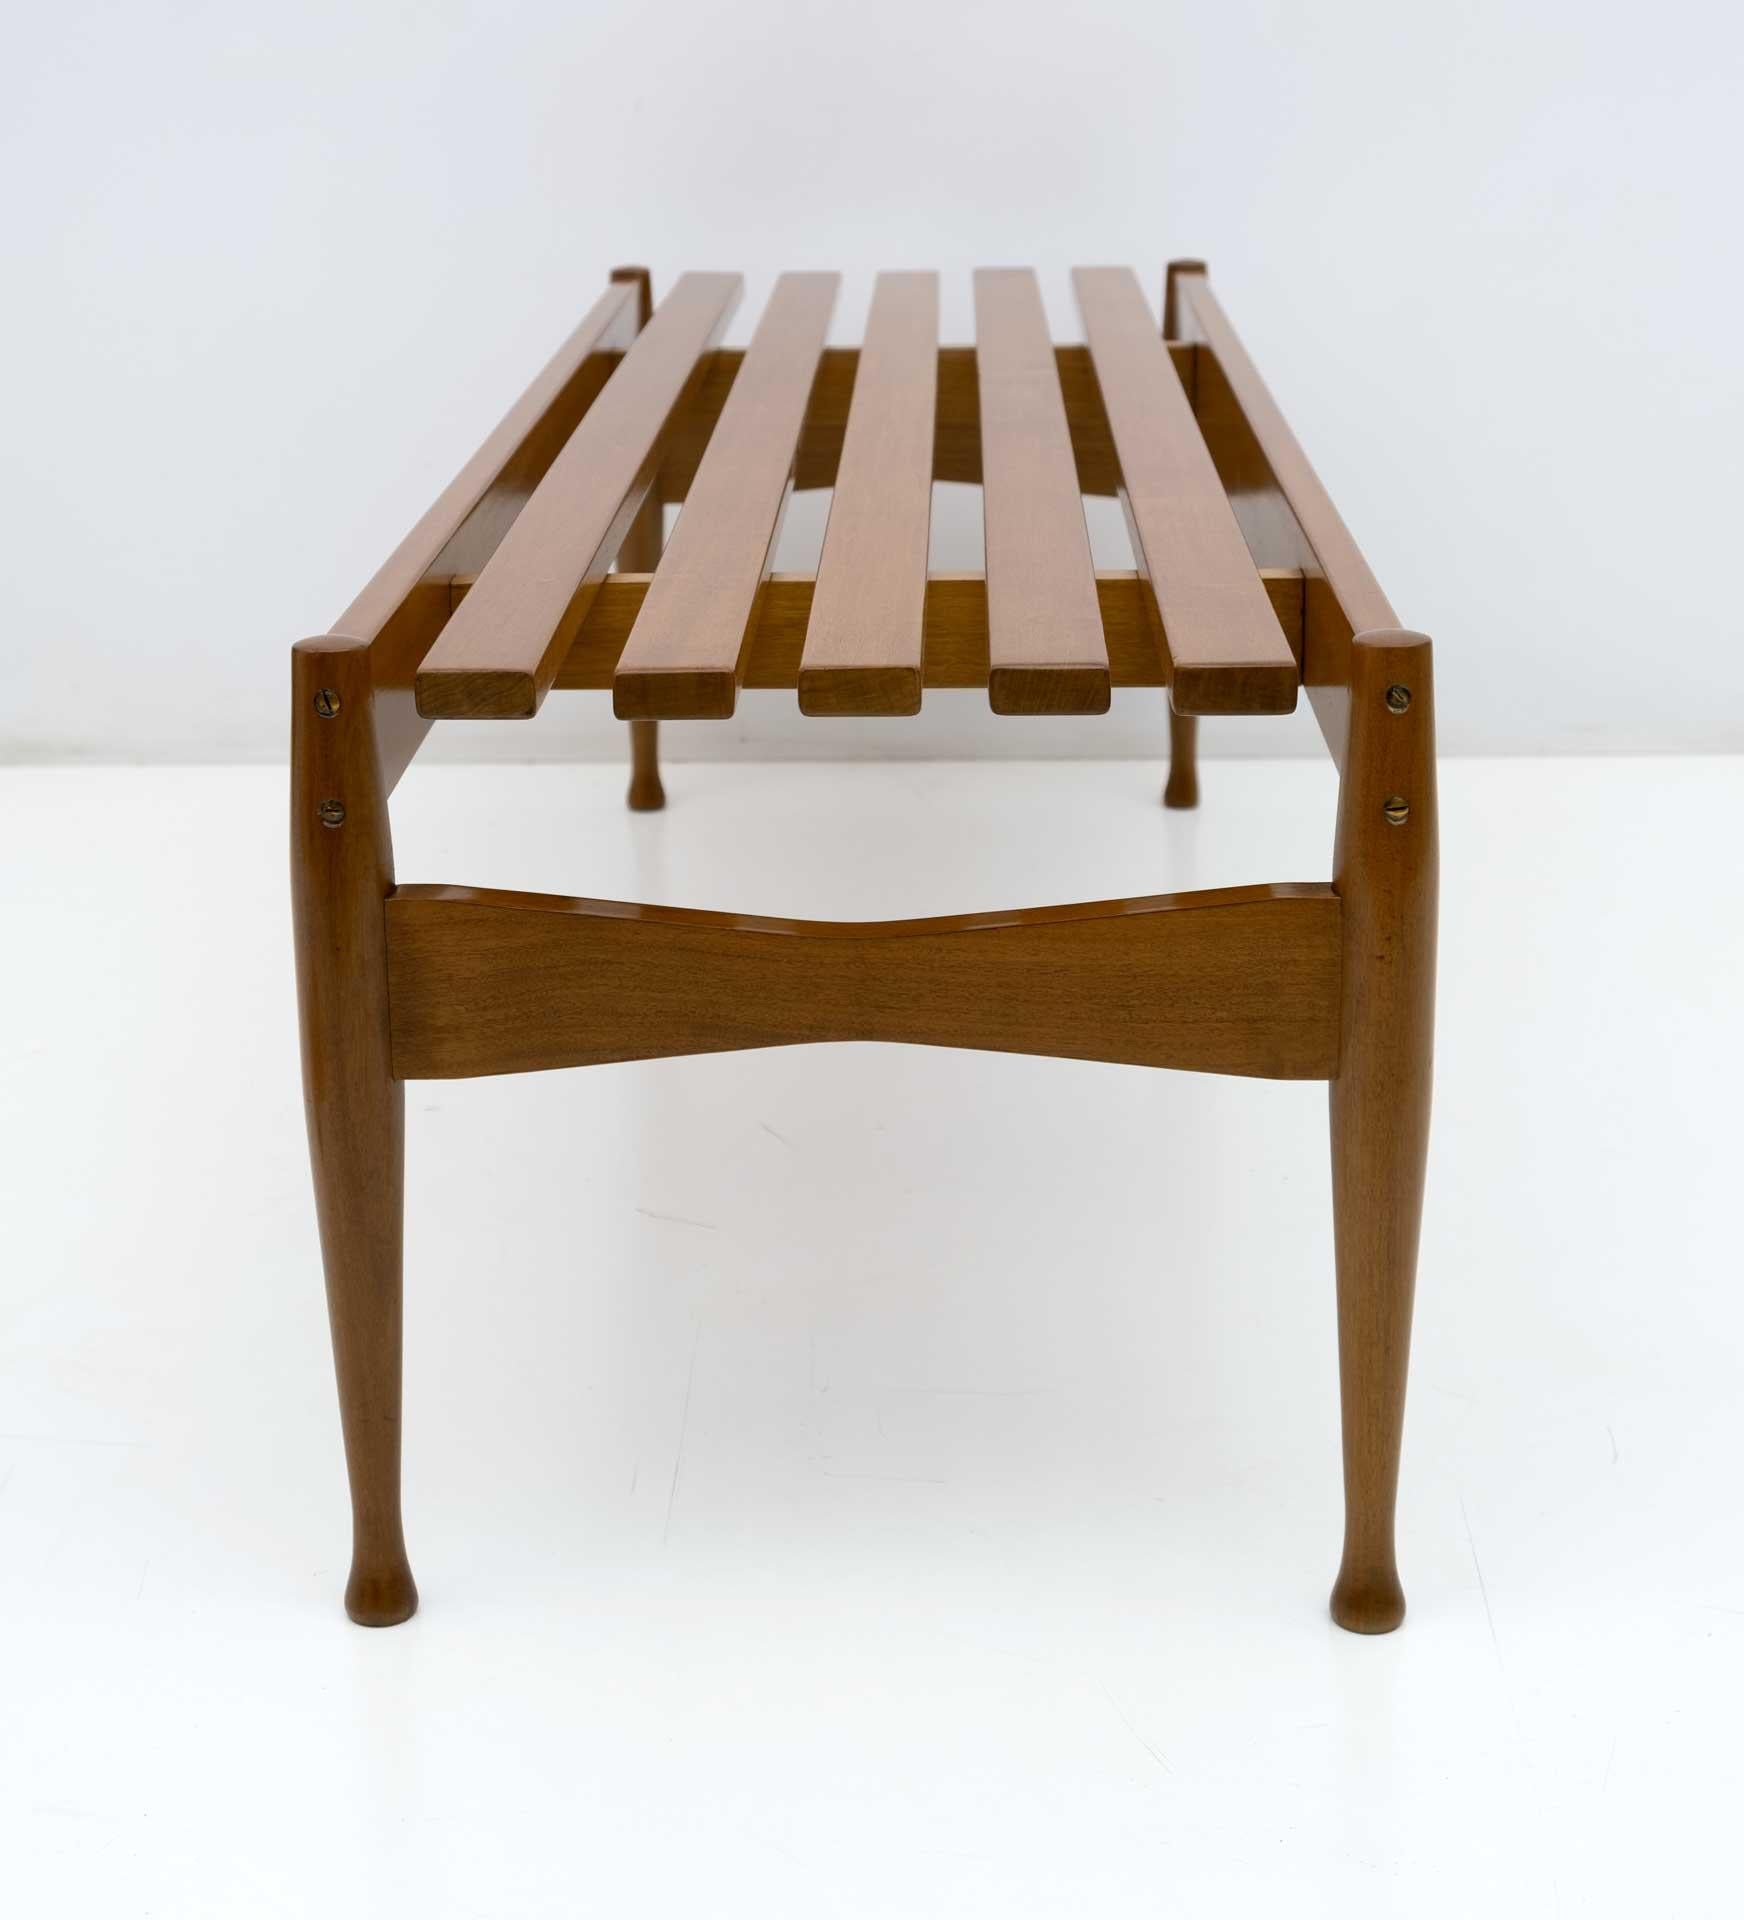 Attributed Giò Ponti Mid-century Modern Italian Bench for Fratelli Reguitti, 50s For Sale 1